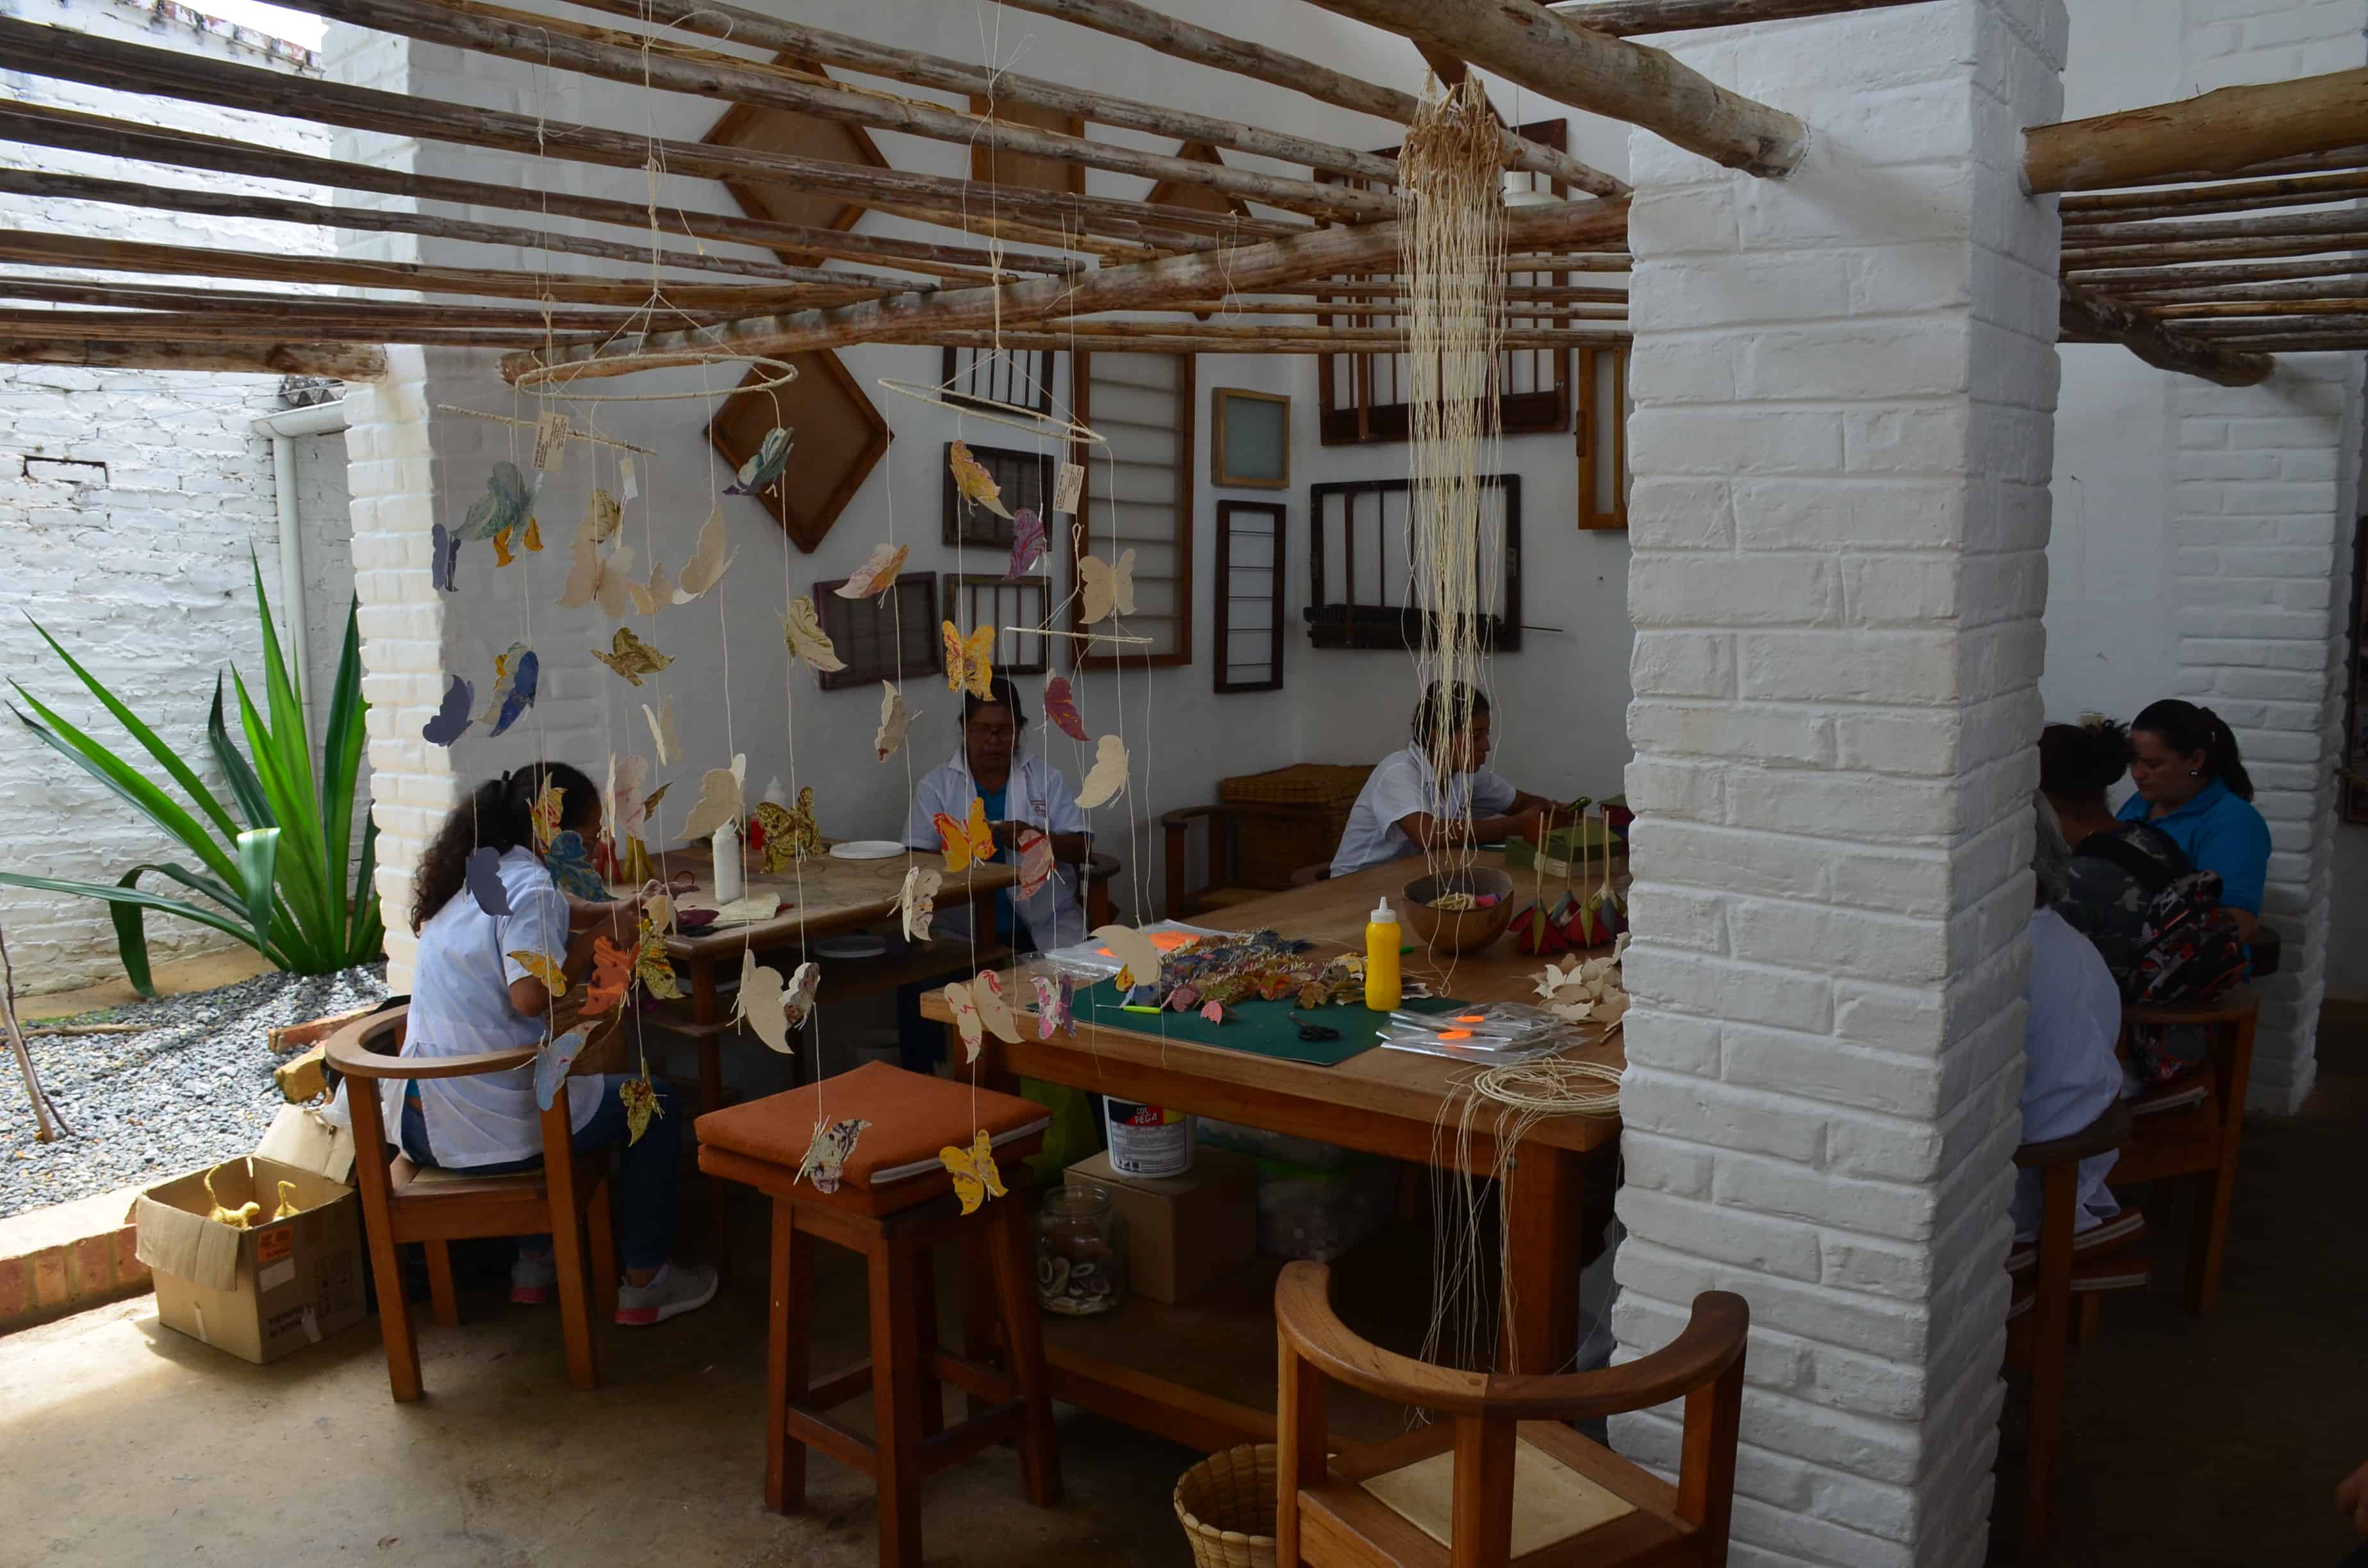 Women creating crafts from the paper at the Barichara Paper Workshop in Barichara, Santander, Colombia